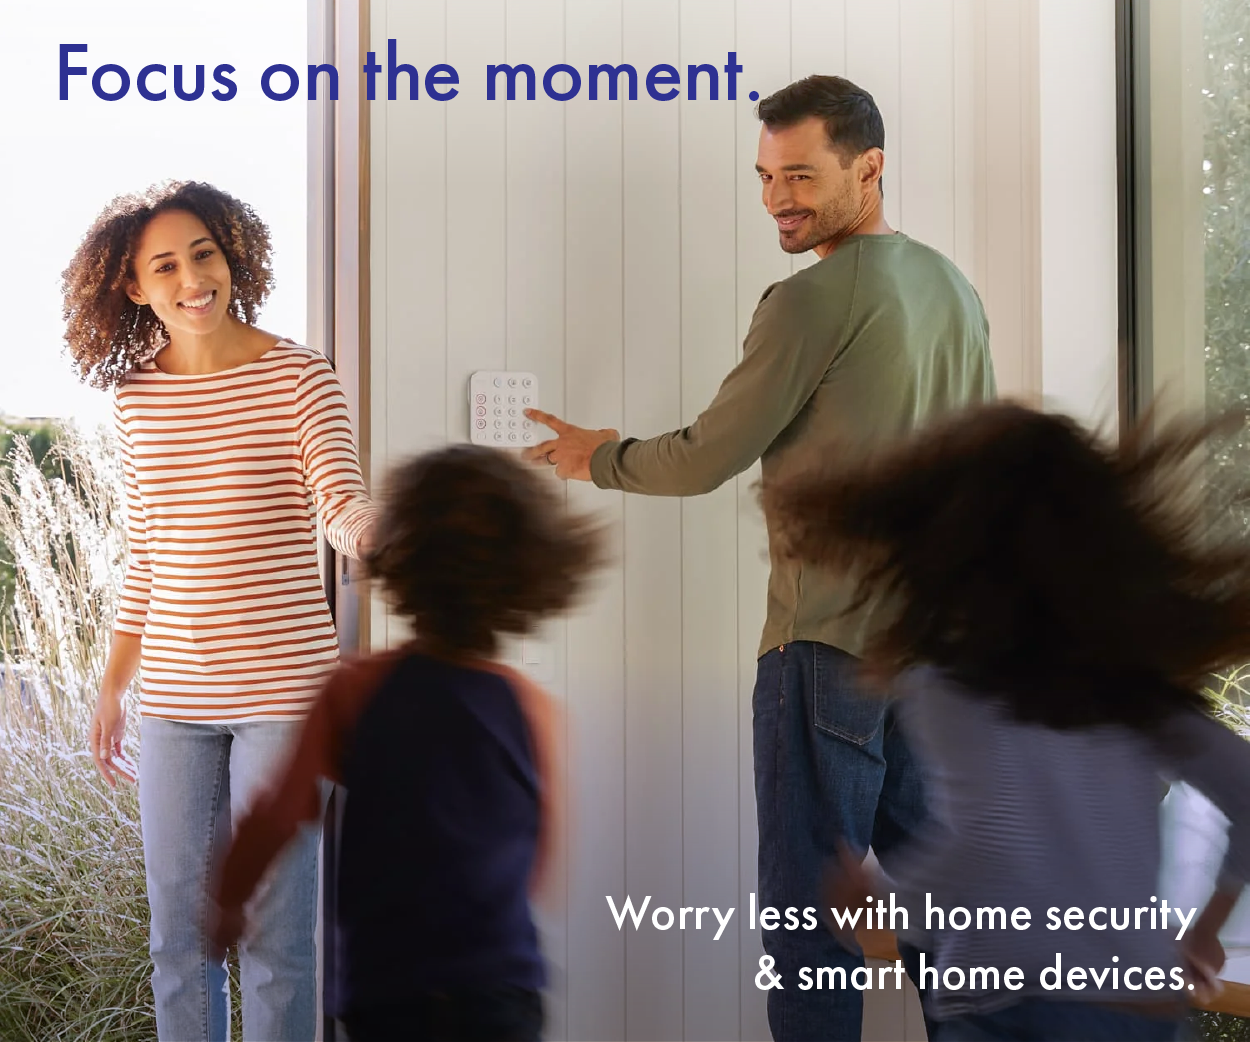 Focus on the moment. Worry less with smart home and home security devices.